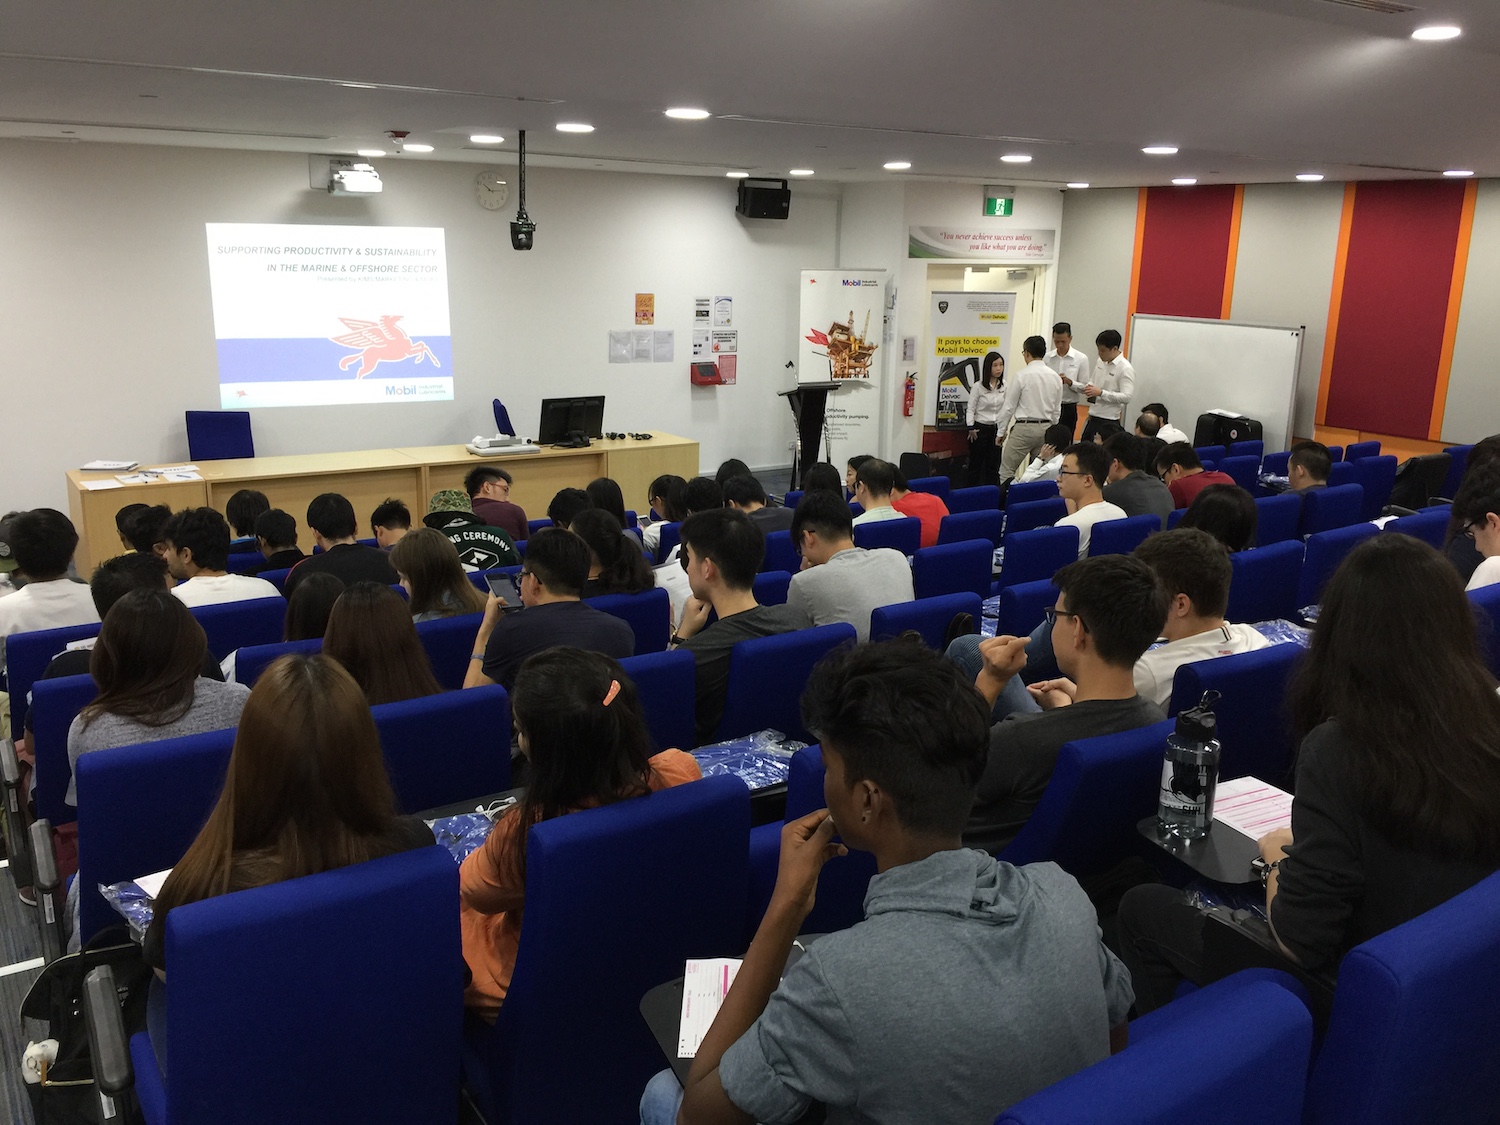 A filled lecture theatre with students waiting for an industry sharing to begin.